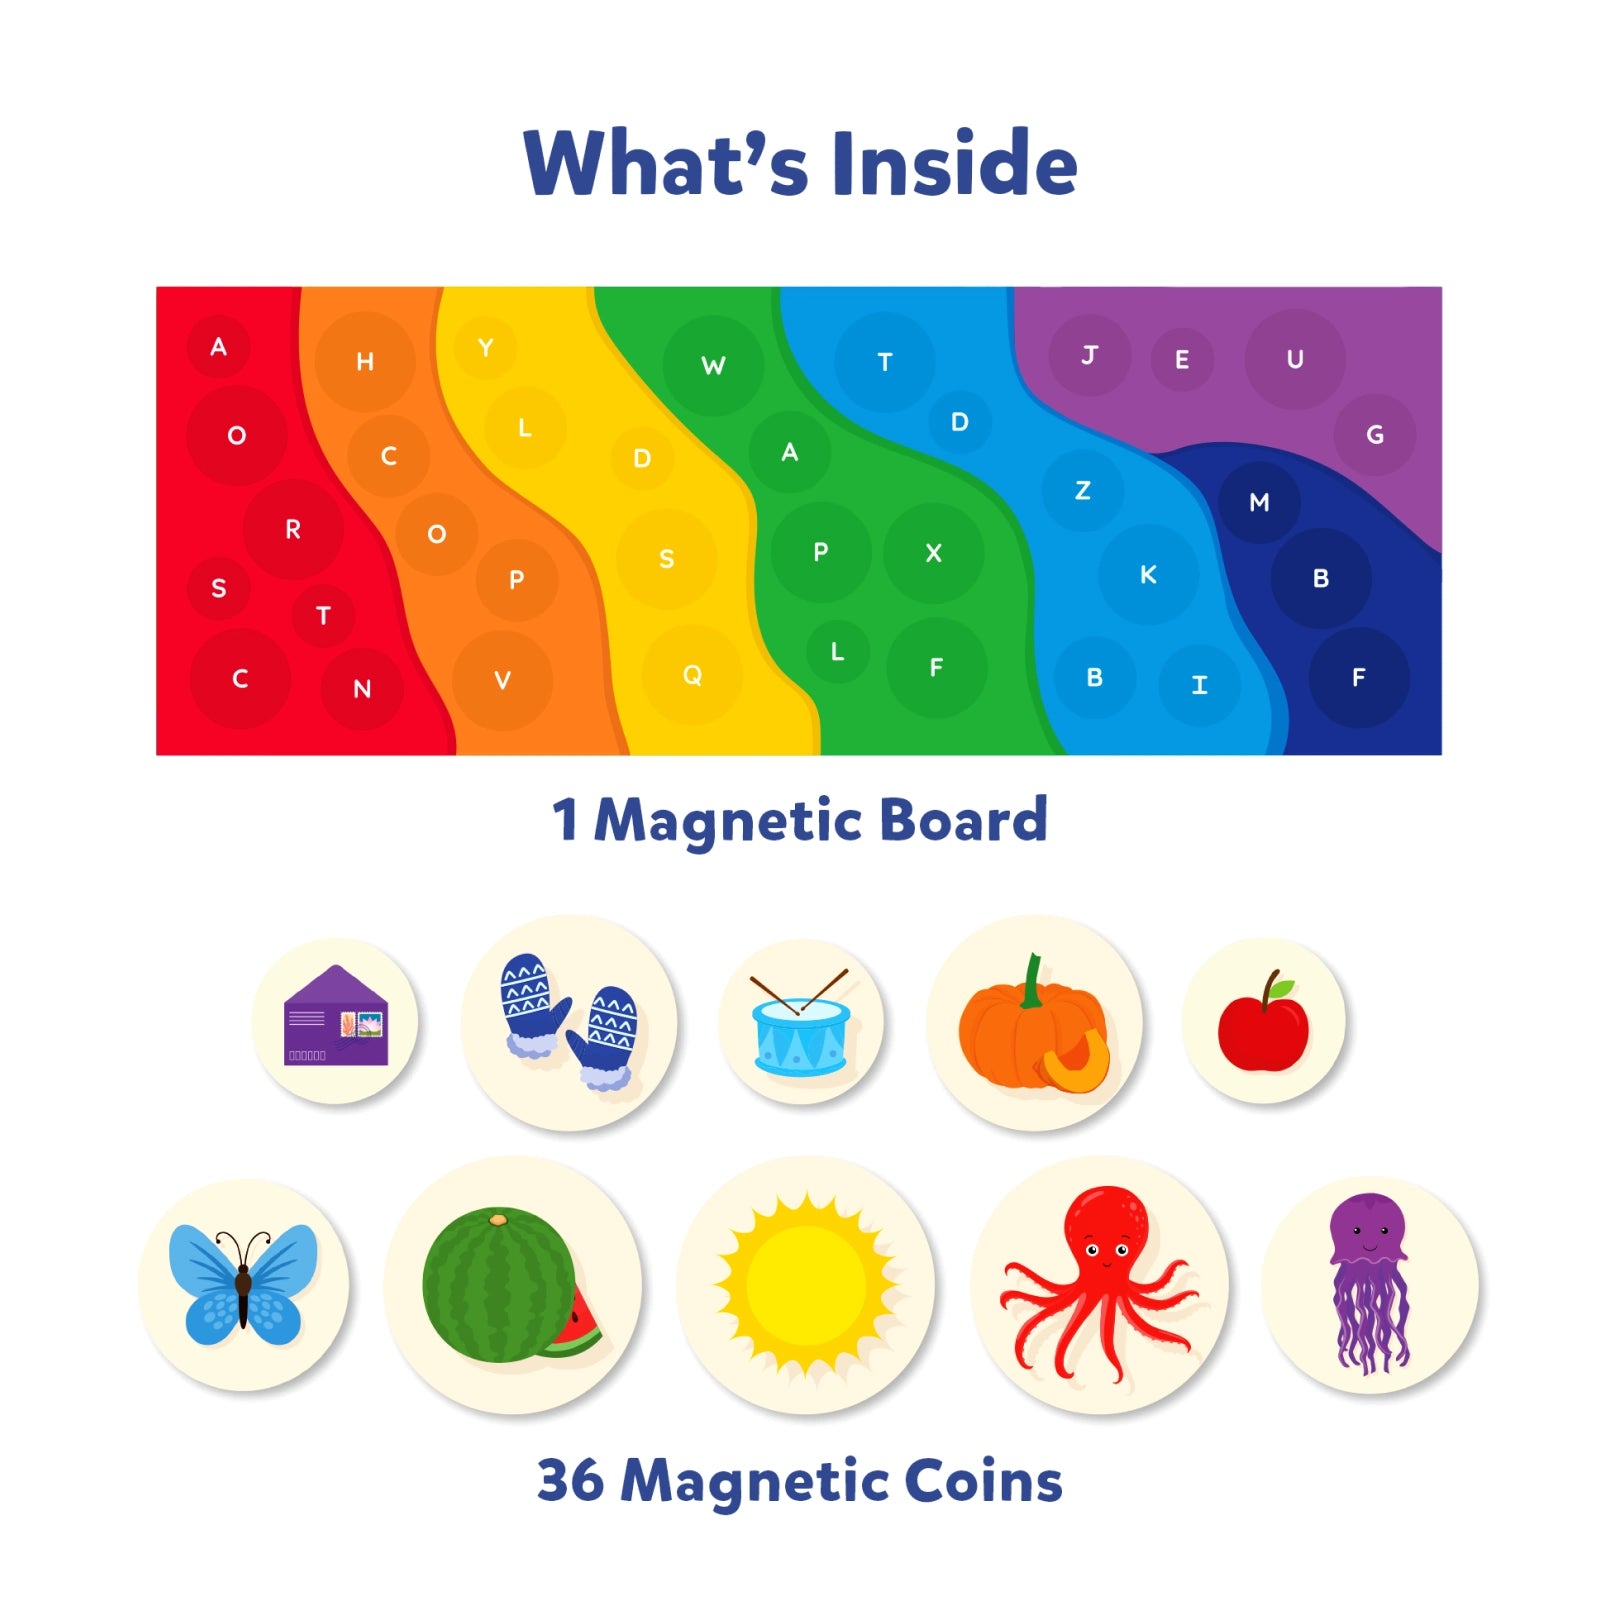 Alphabet Rainbow  | Magnetic Matching Activity (ages 3-6)